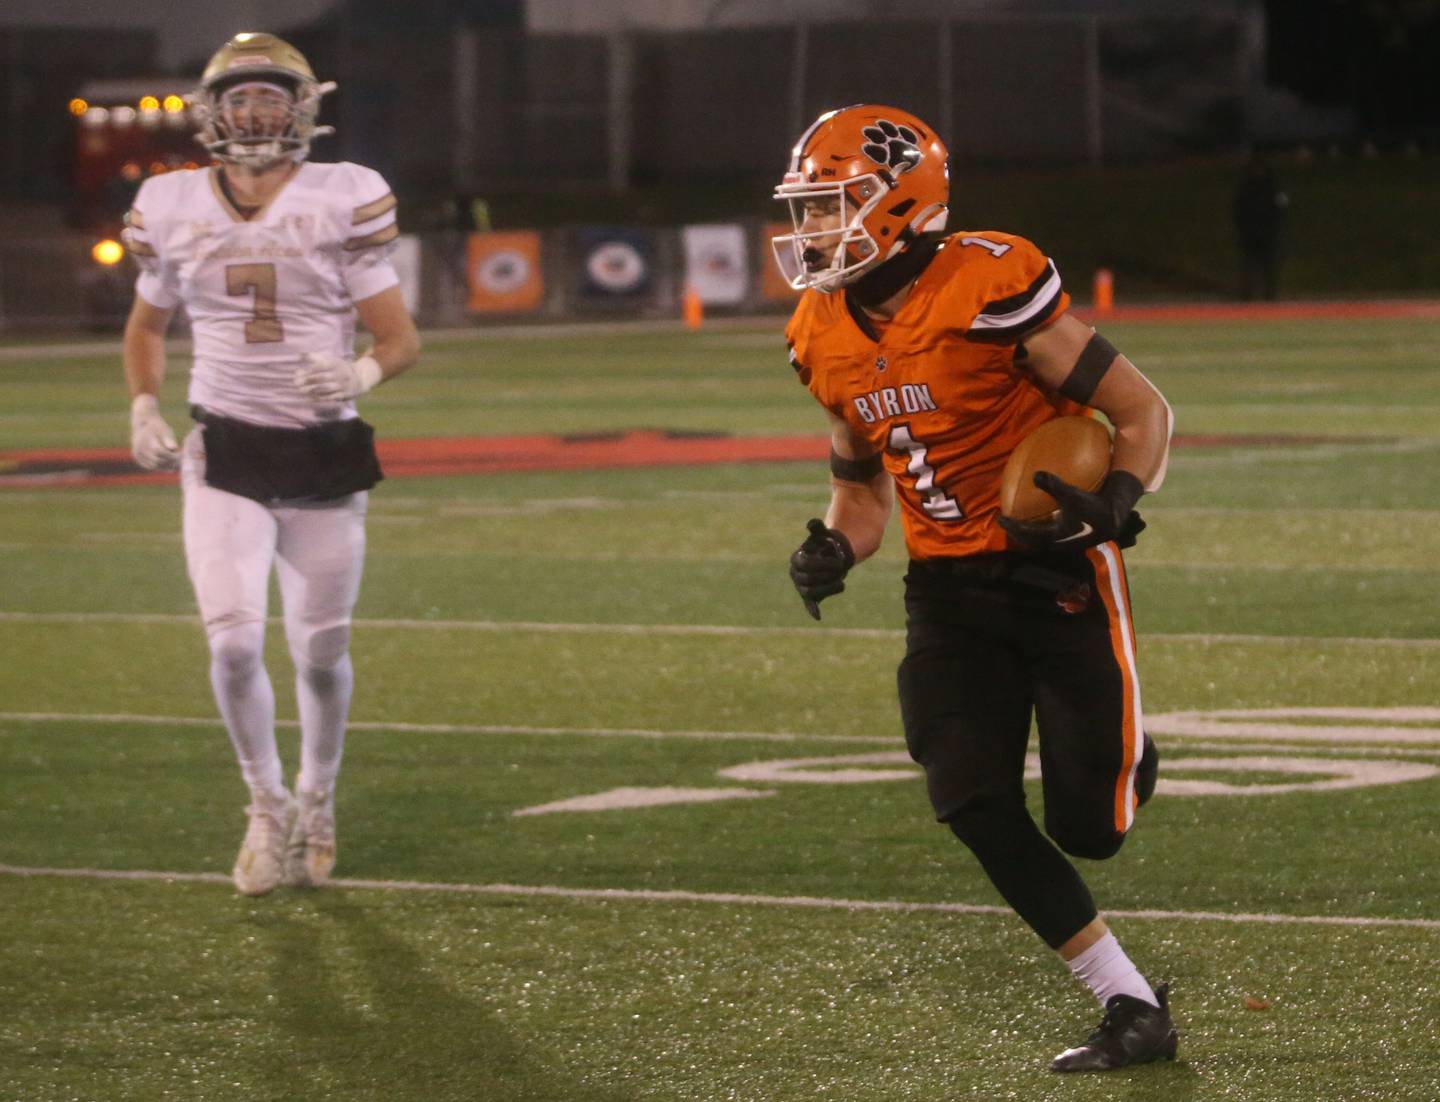 Byron's Brayden Knoll runs down the sideline to score a touchdown as Mt. Carmel's Andrew Gillihan trails behind during the Class 3A State football championship on Friday, Nov, 24, 2023 at Hancock Stadium in Normal.